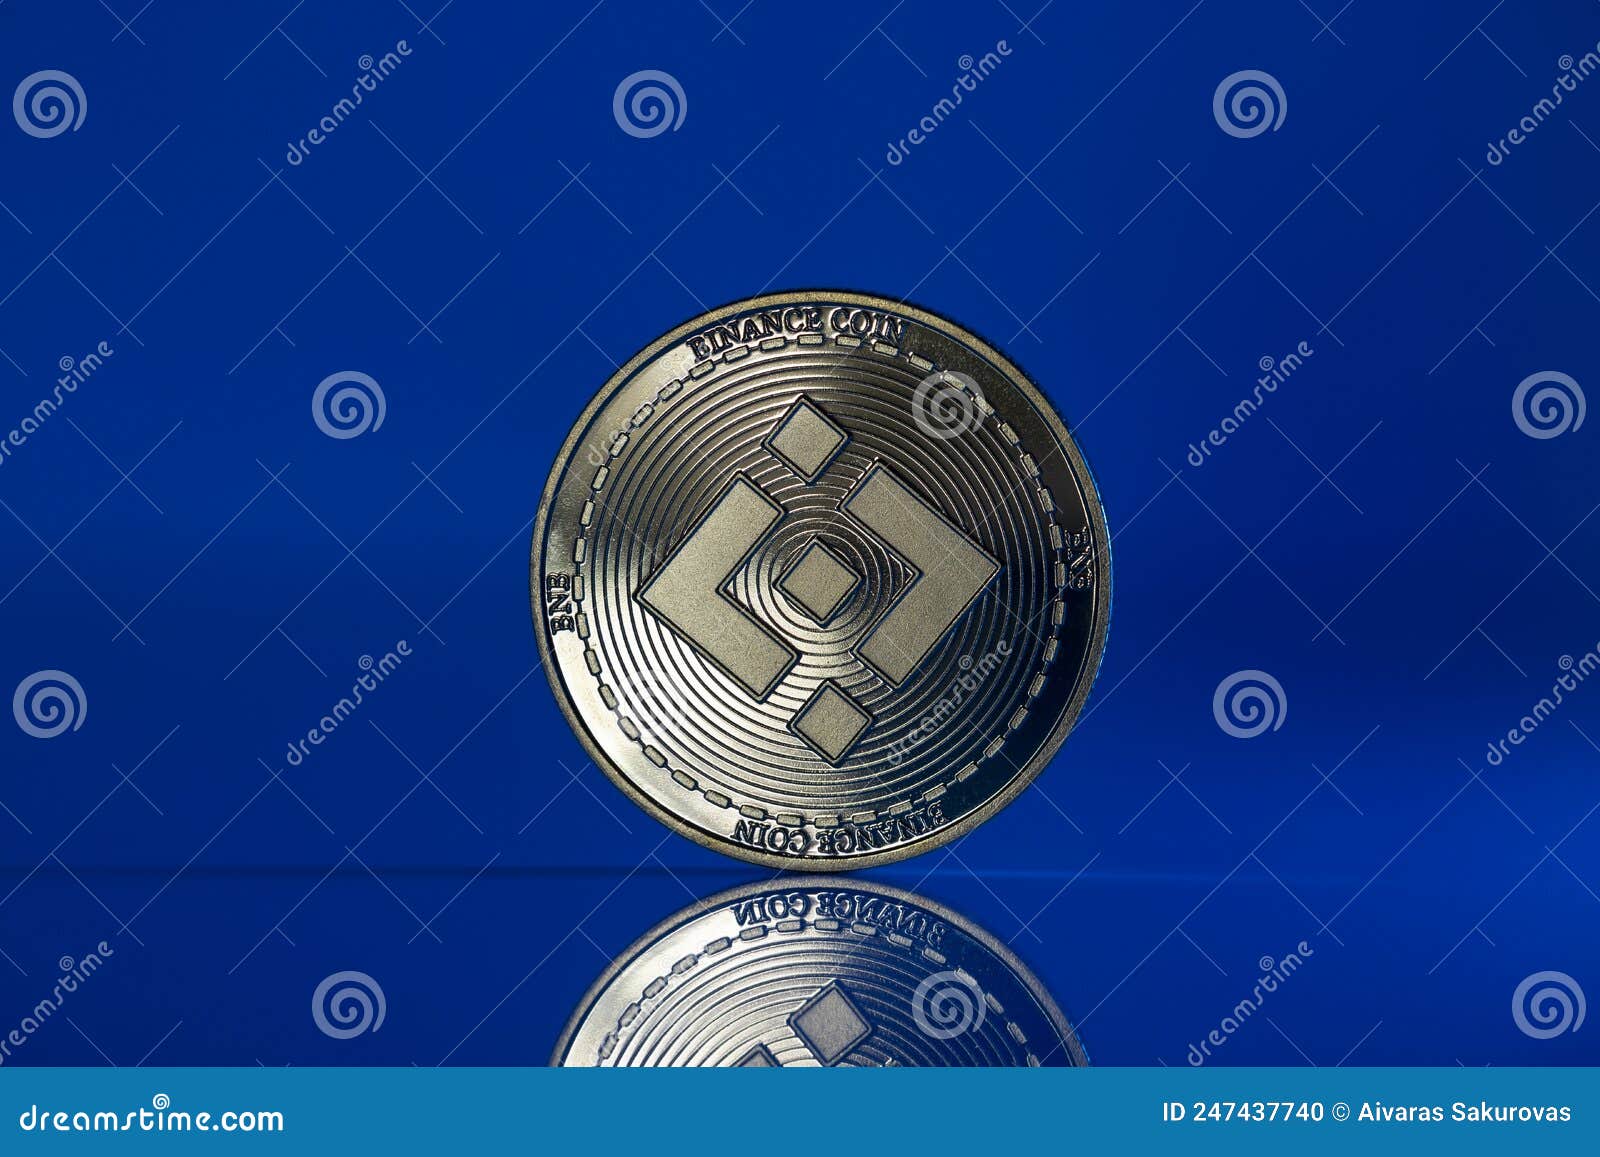 Binance Bnb Crypto Coin Placed On Reflective Surface And Lit With Blue Light Editorial Image